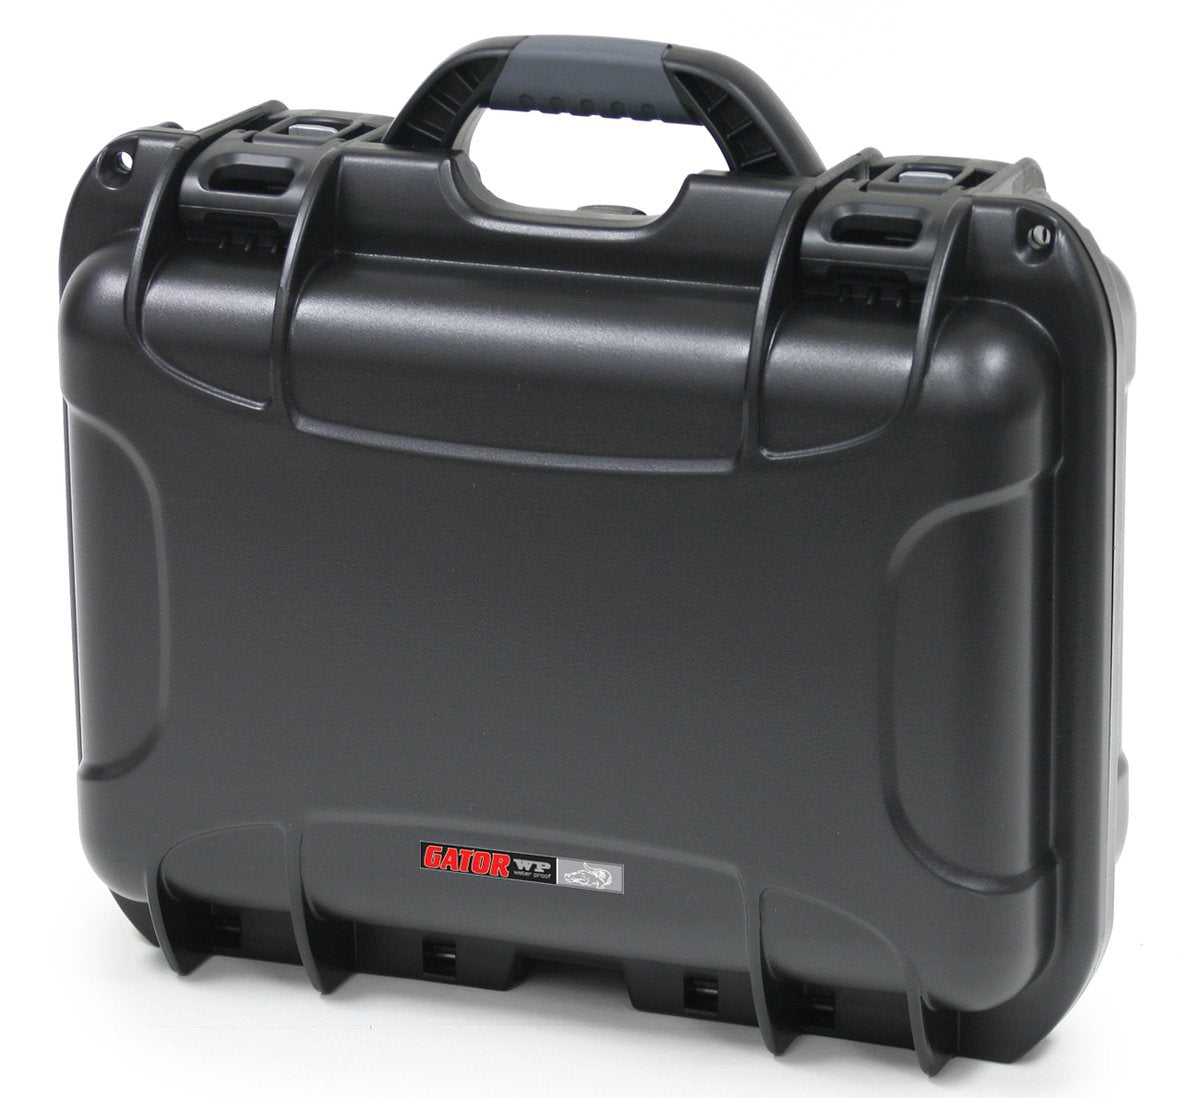 Black waterproof injection molded case with interior dimensions of 13.8" x 9.3" x 6.2". DICED FOAM